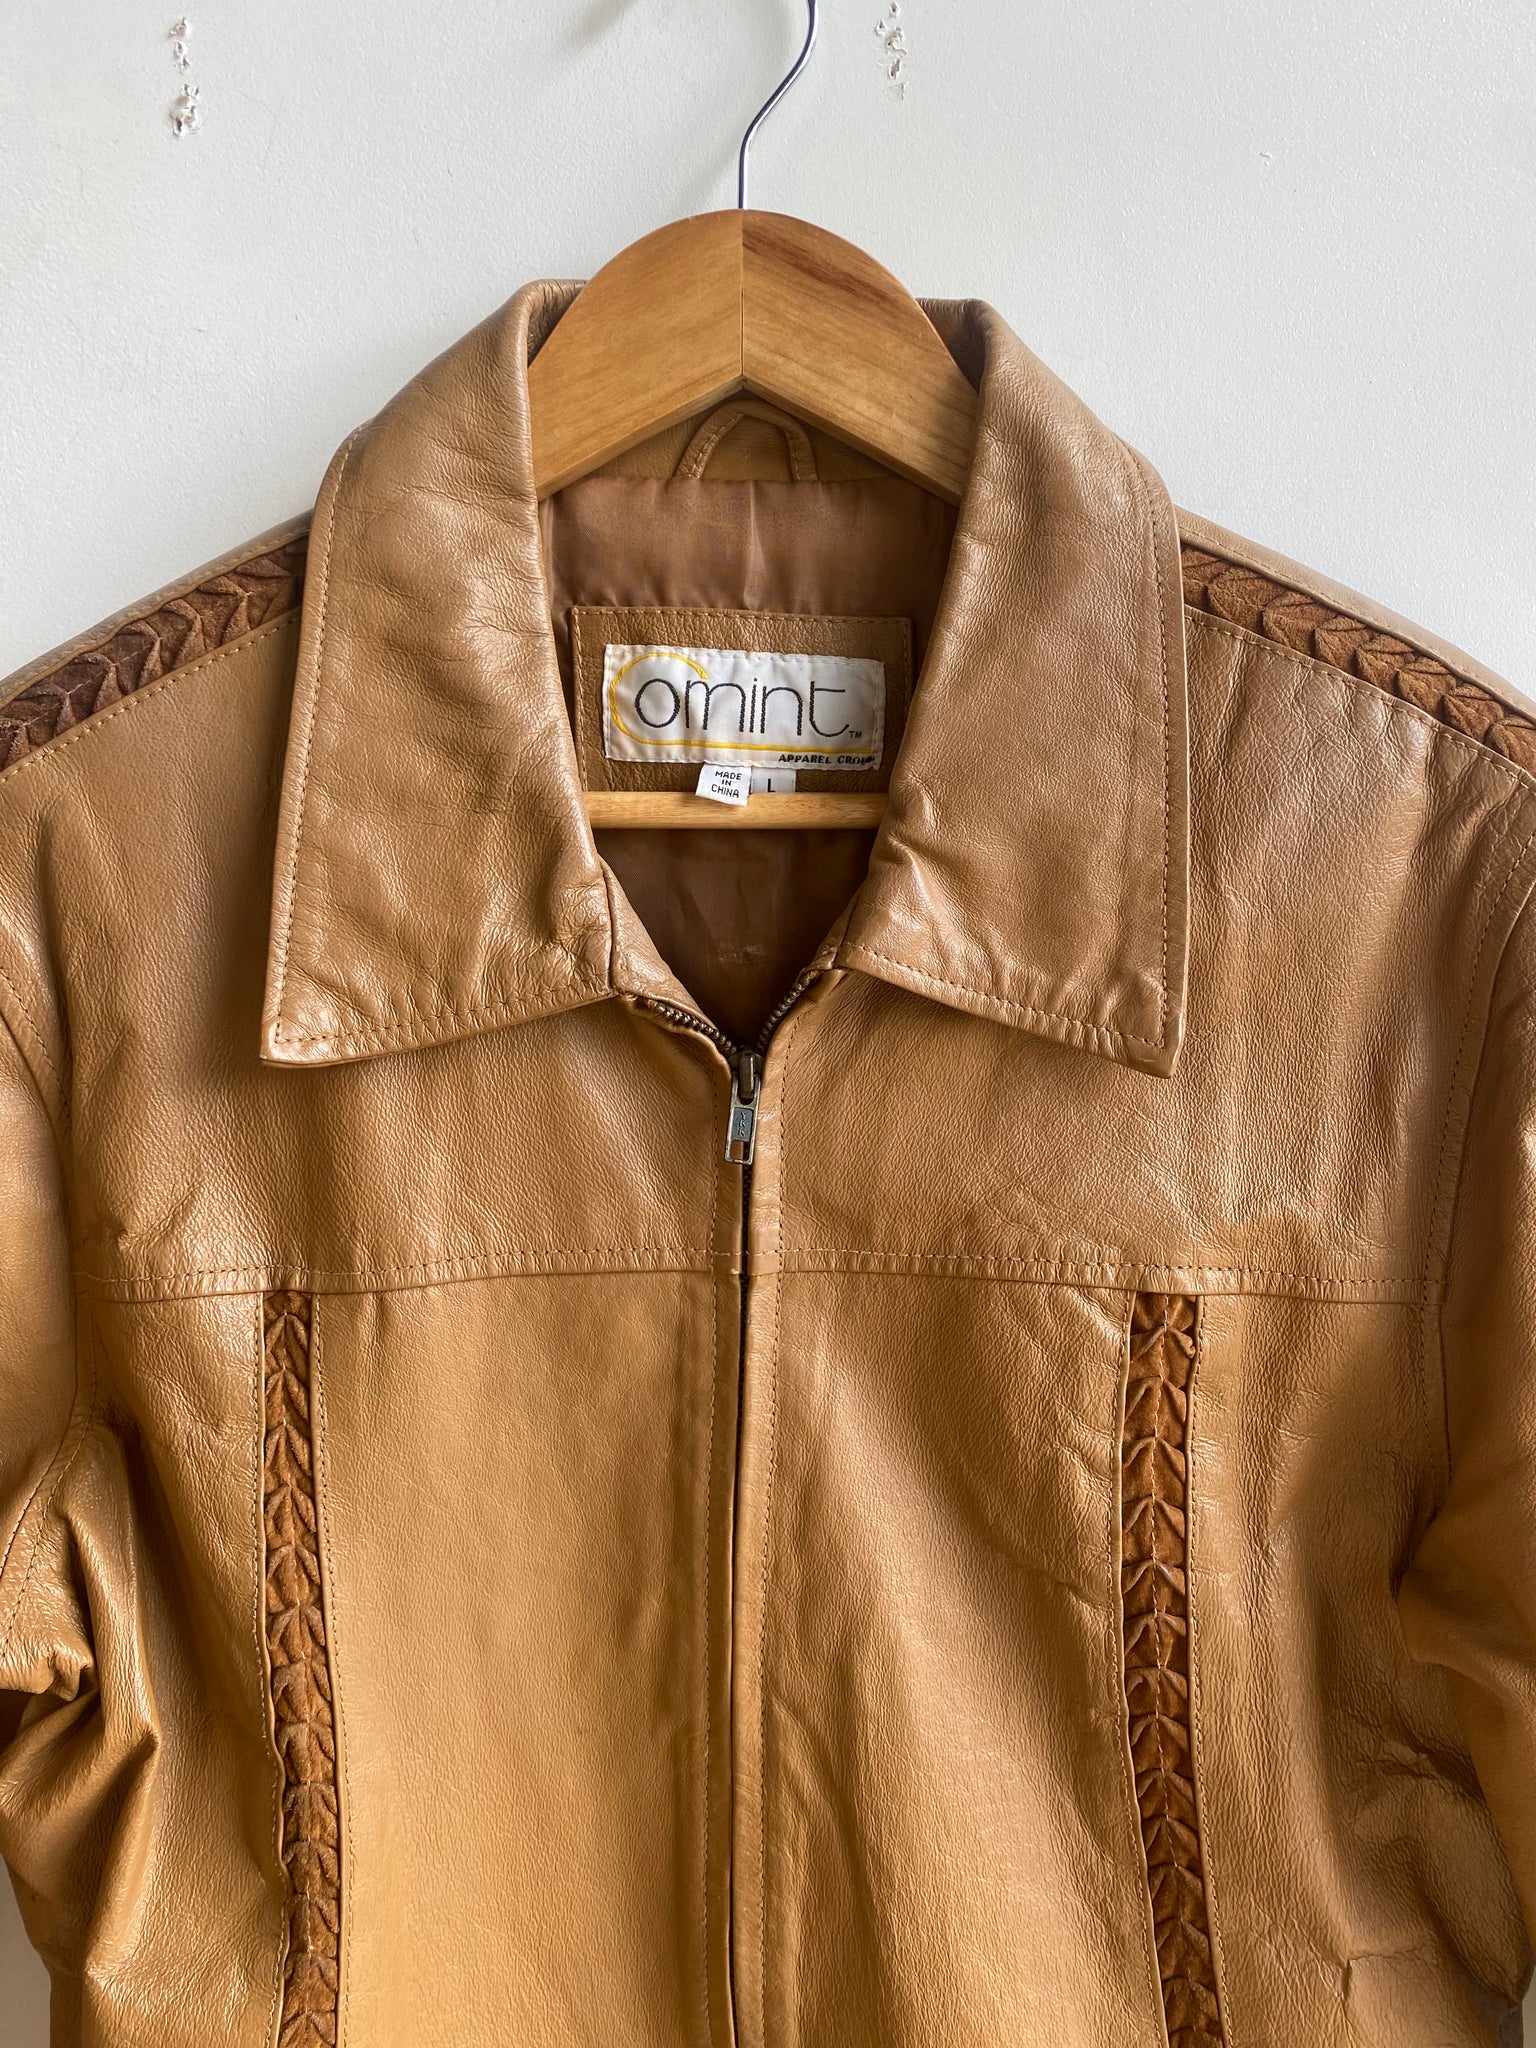 80s "Comint" Leather Jacket